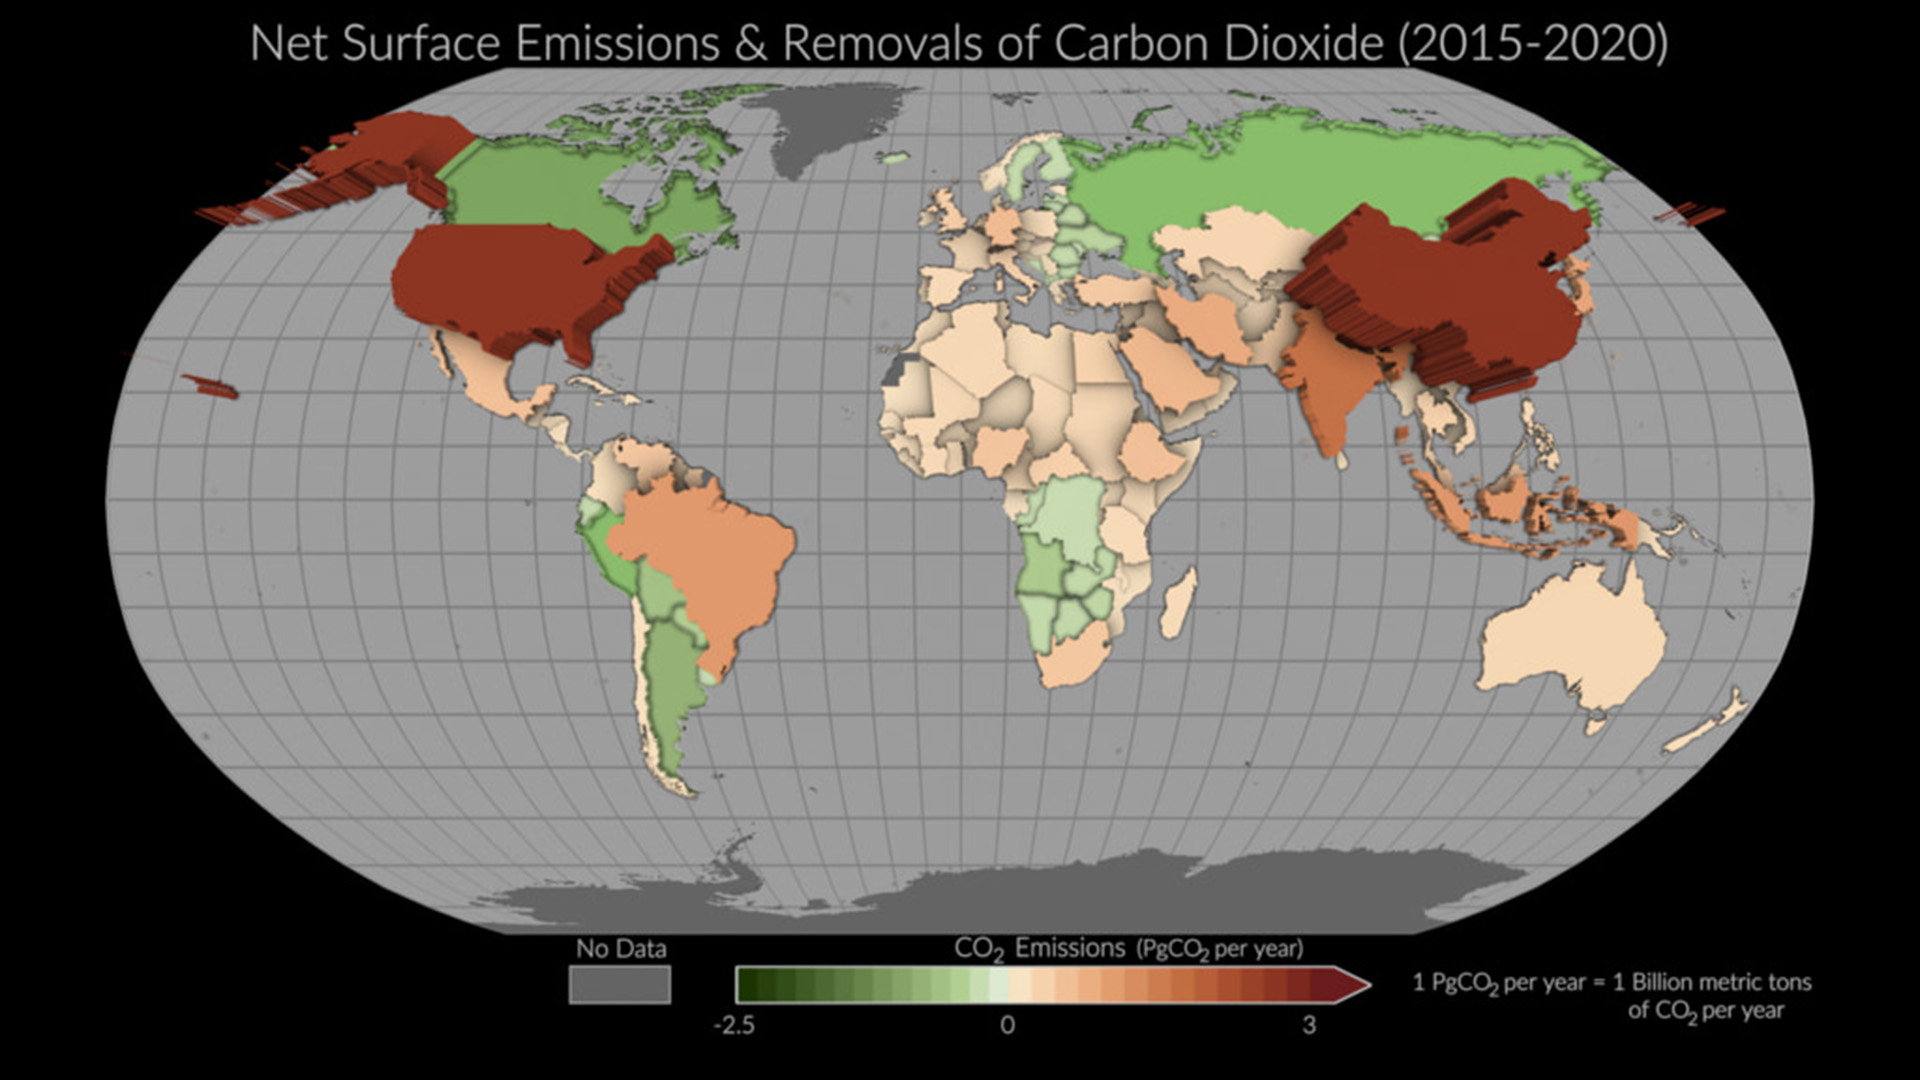 Mean net surface emissions and removals of carbon dioxide (CO₂) for over 100 countries around the world for the period 2015-2020.